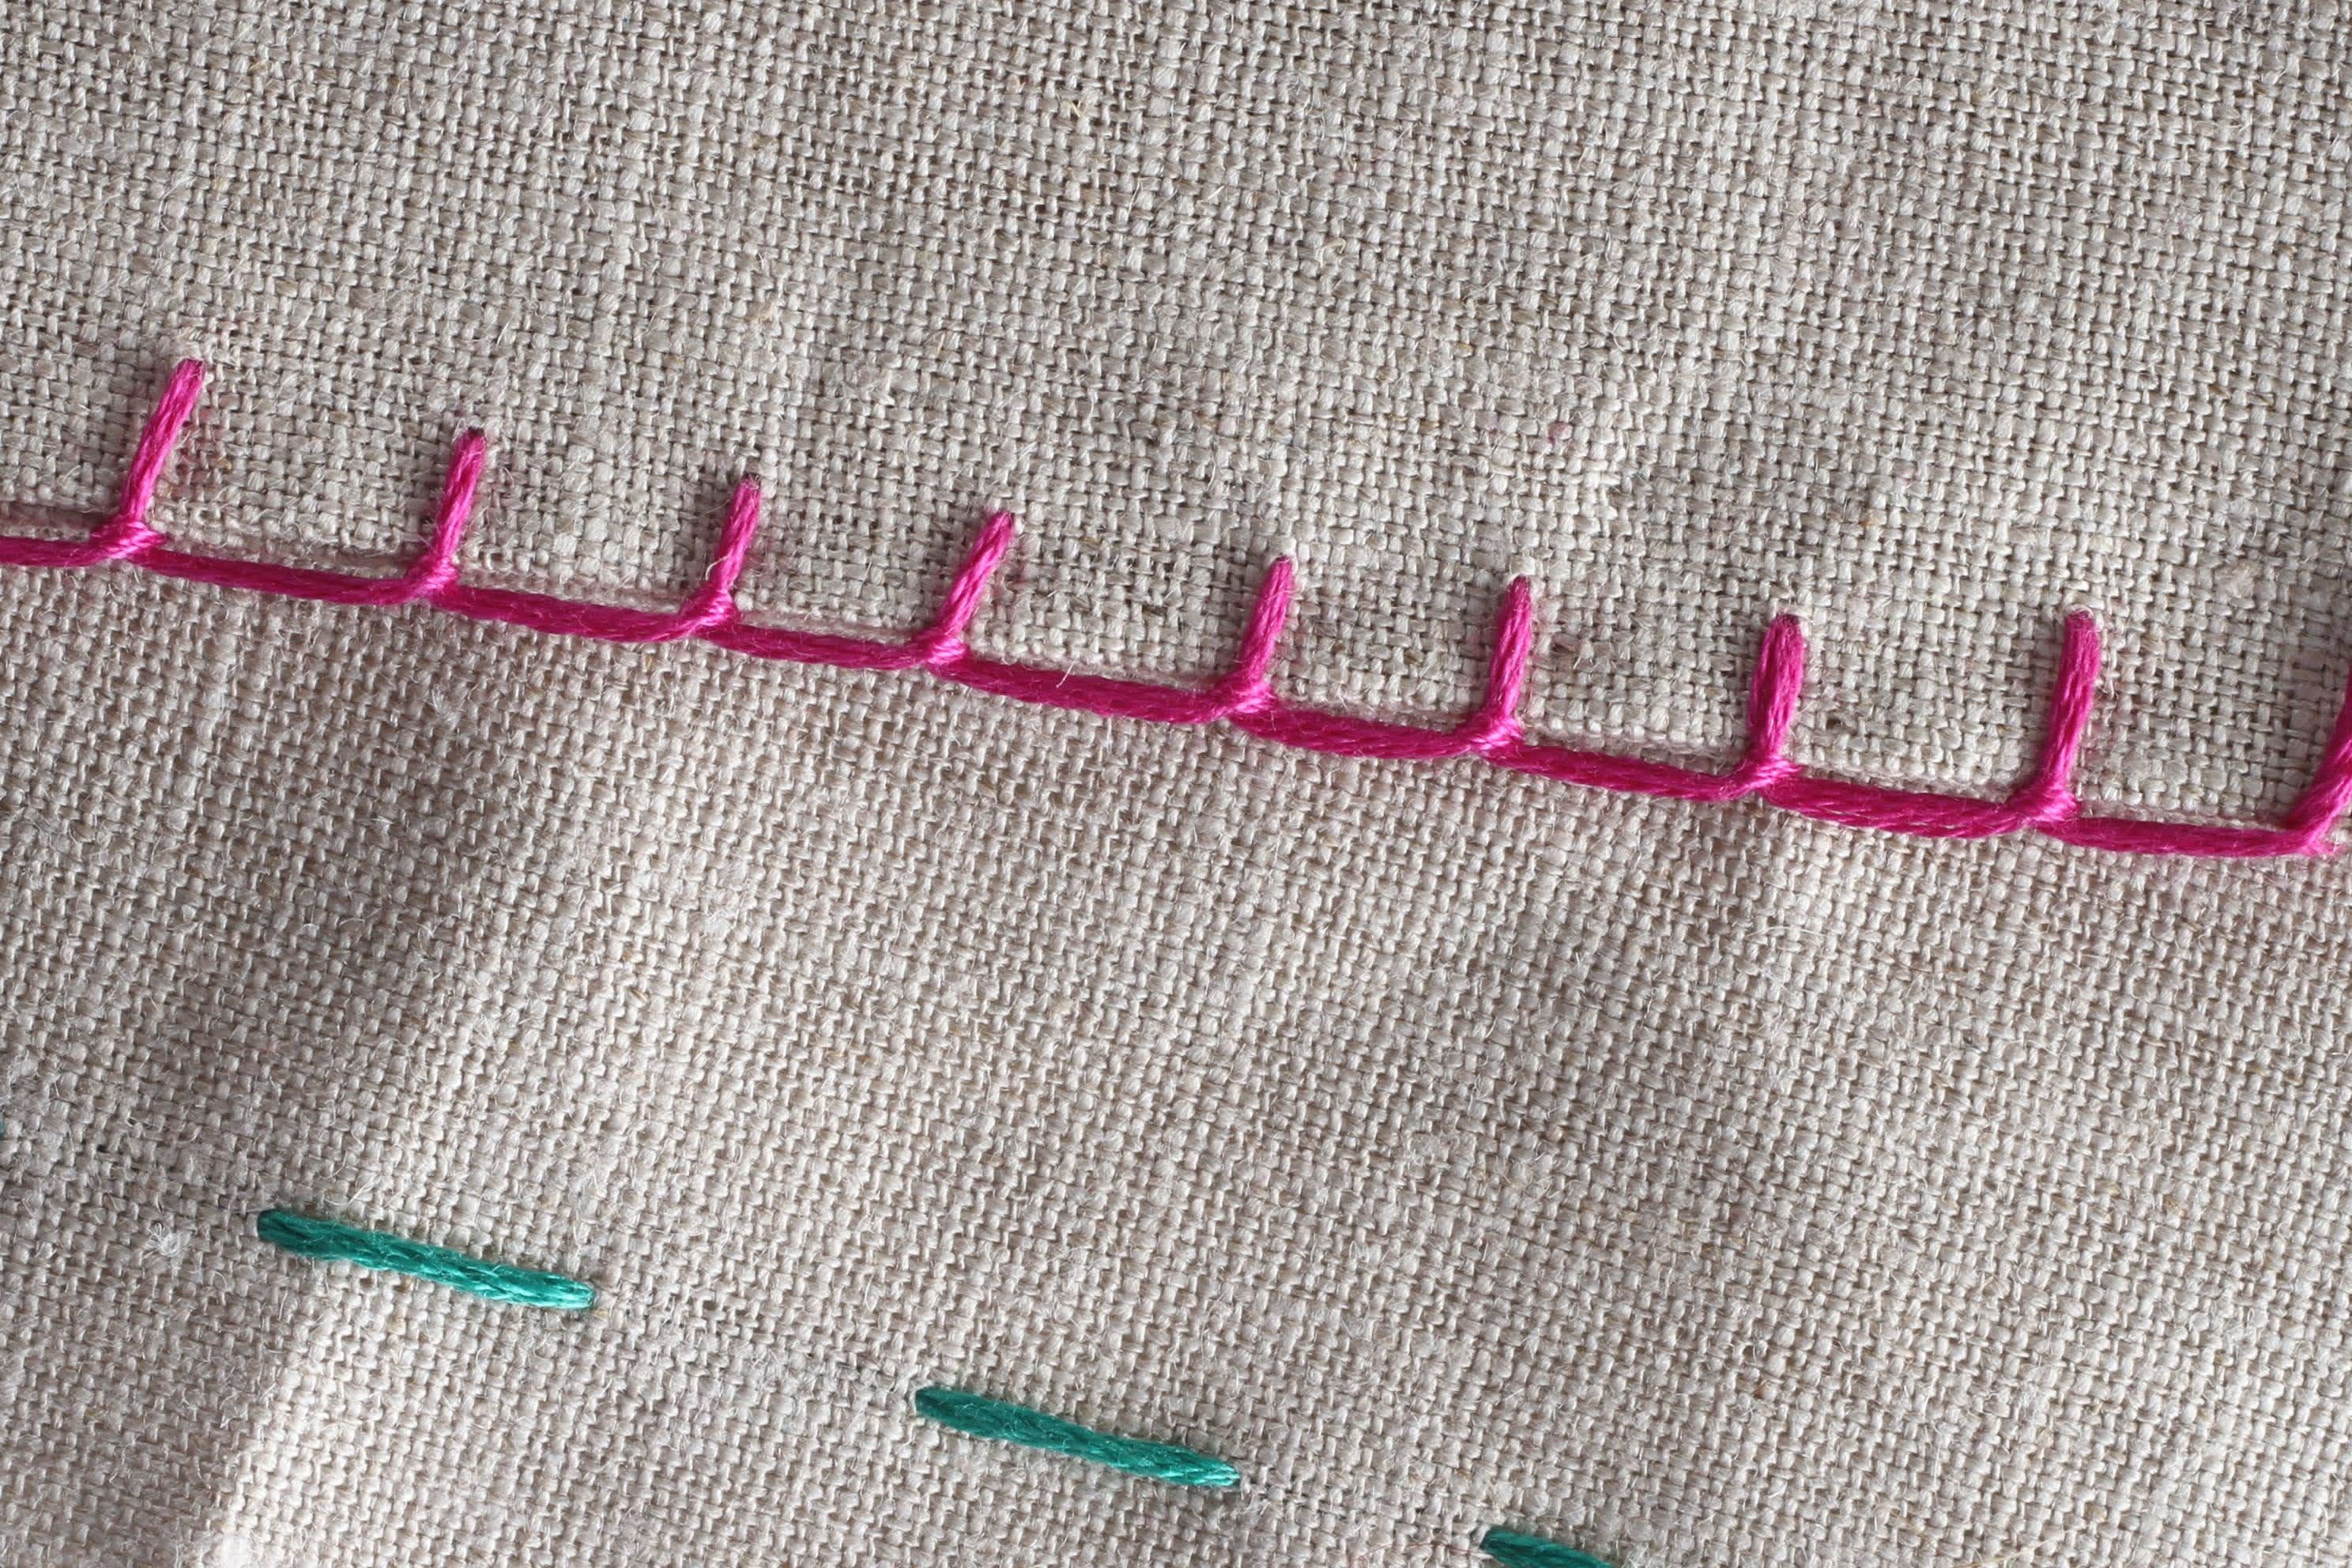 How To Sew by Hand: 6 Helpful Stitches for Home Sewing Projects